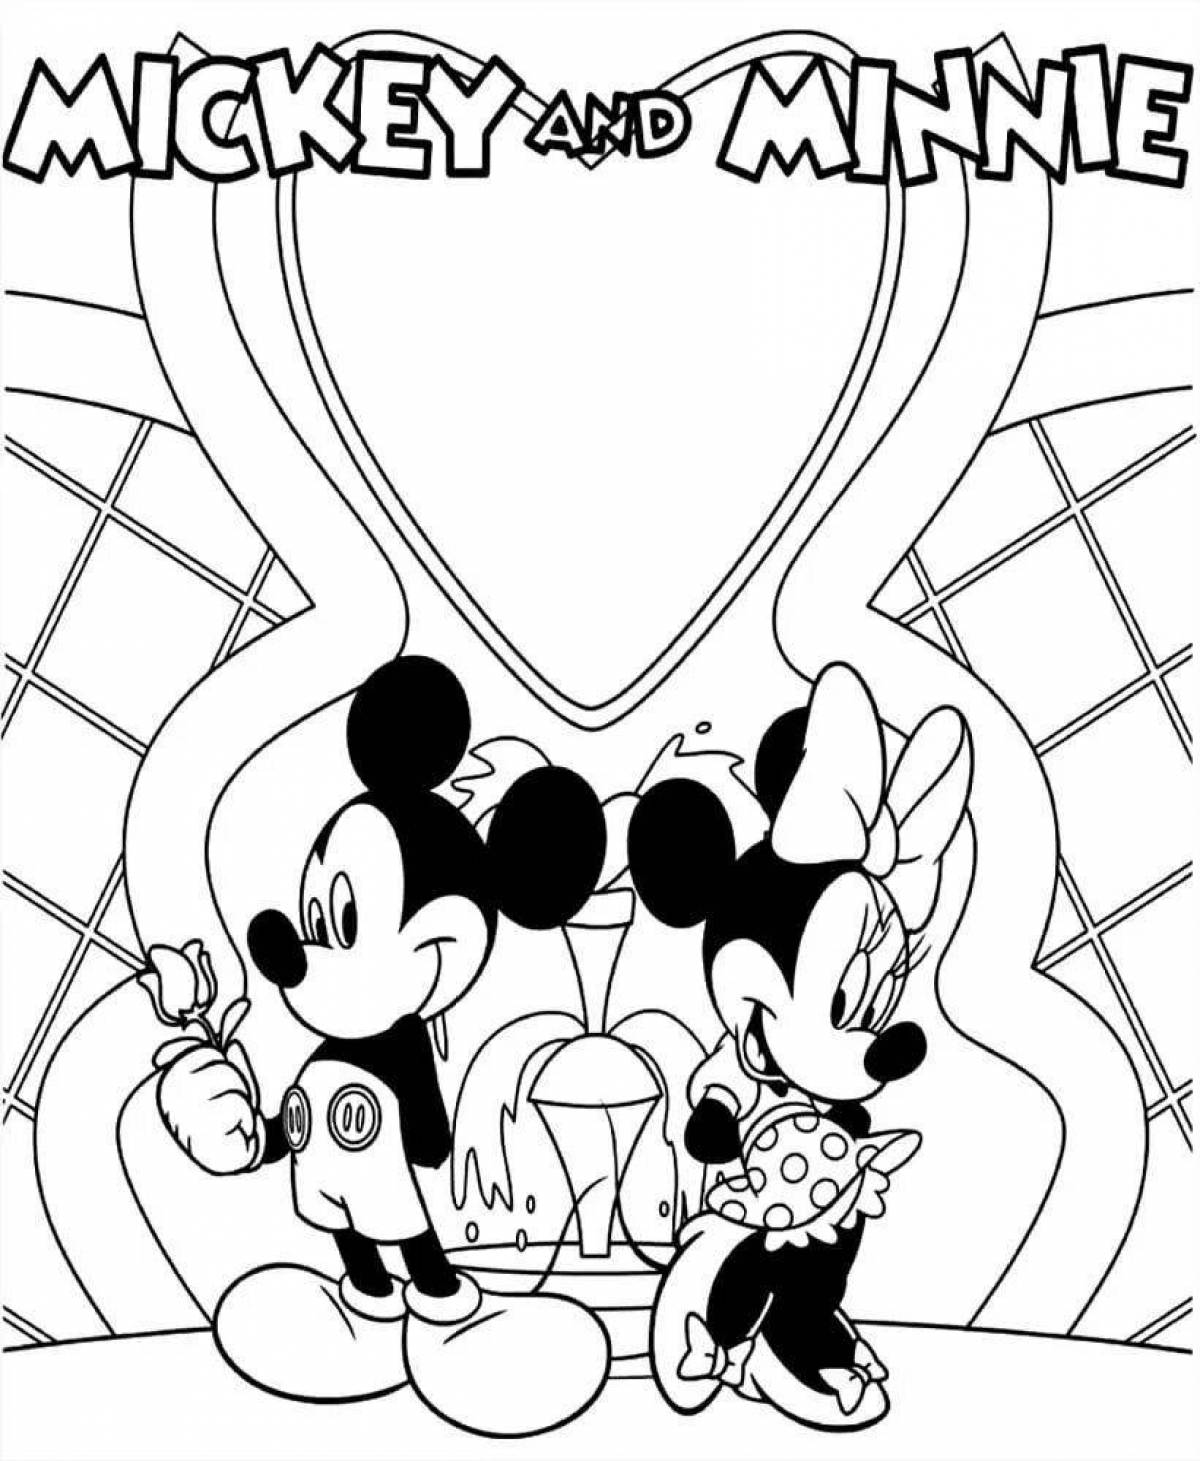 Attractive mickey mouse club coloring book